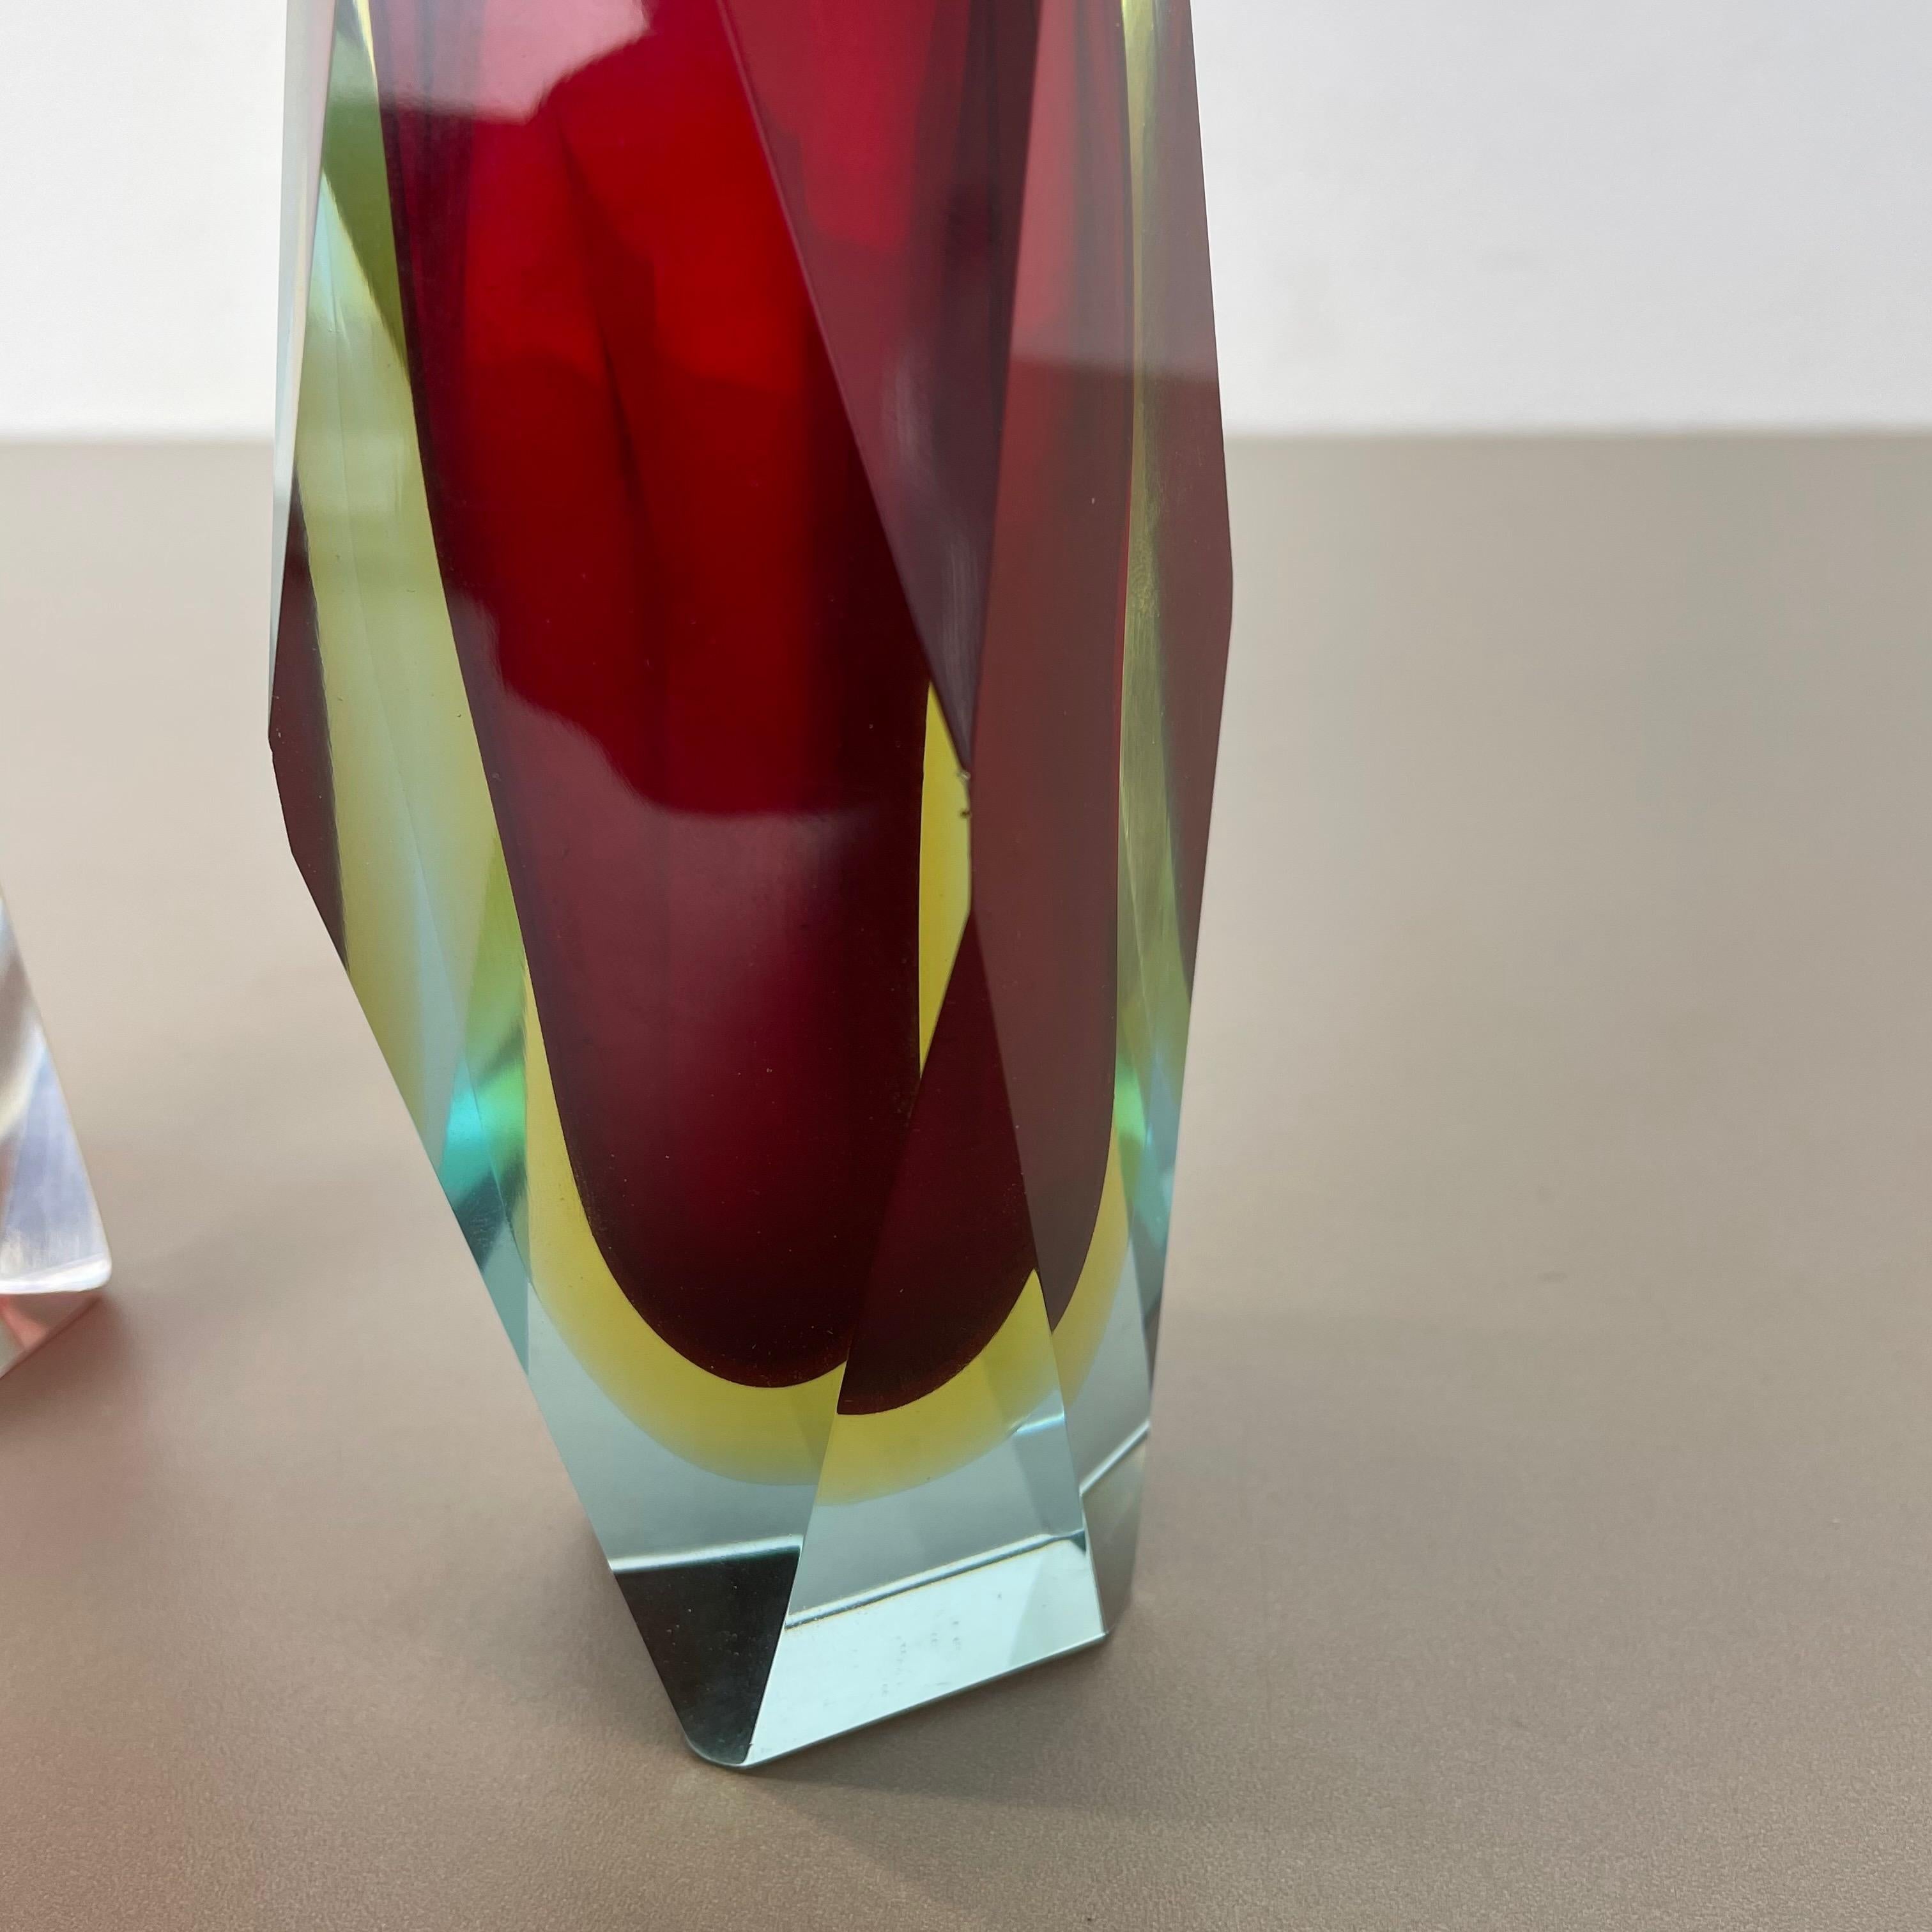 Set of 2 Faceted Murano Glass Sommerso Vase Designed by Flavio Poli Italy, 1970s For Sale 8